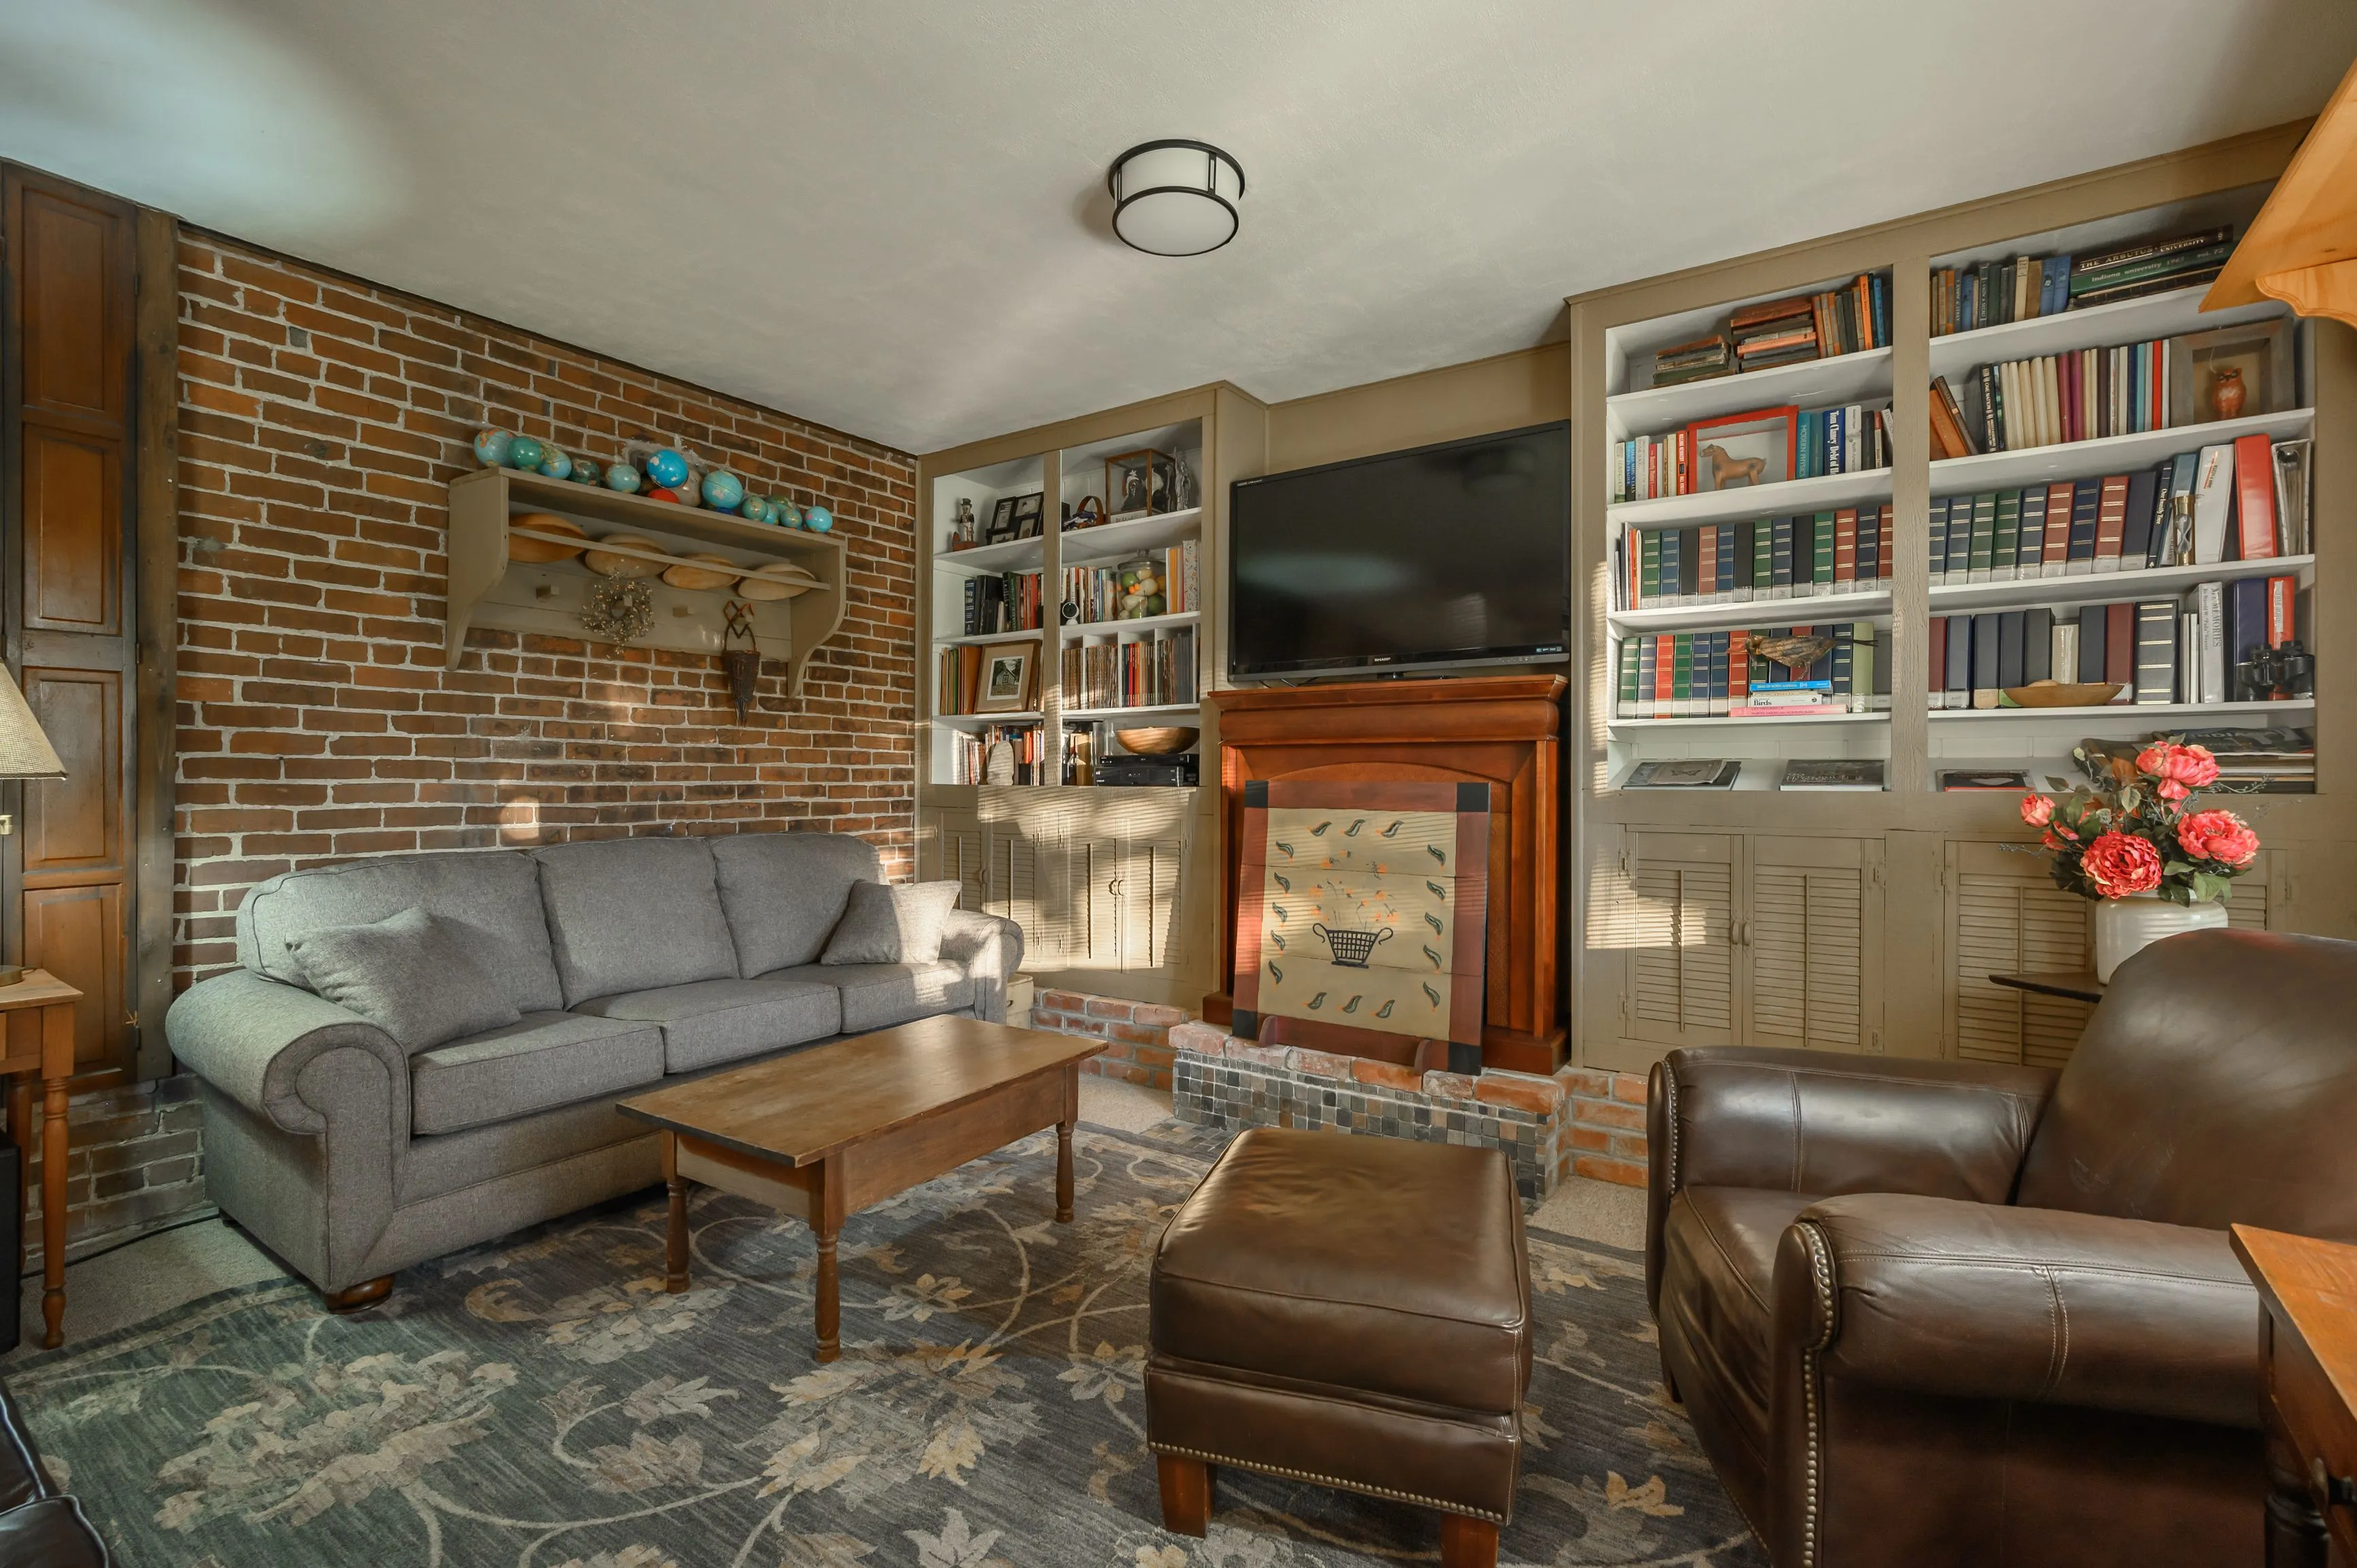 Cozy living room interior featuring a gray couch, leather armchair, wooden coffee table, bookshelves filled with books, a brick fireplace, and decorative elements.